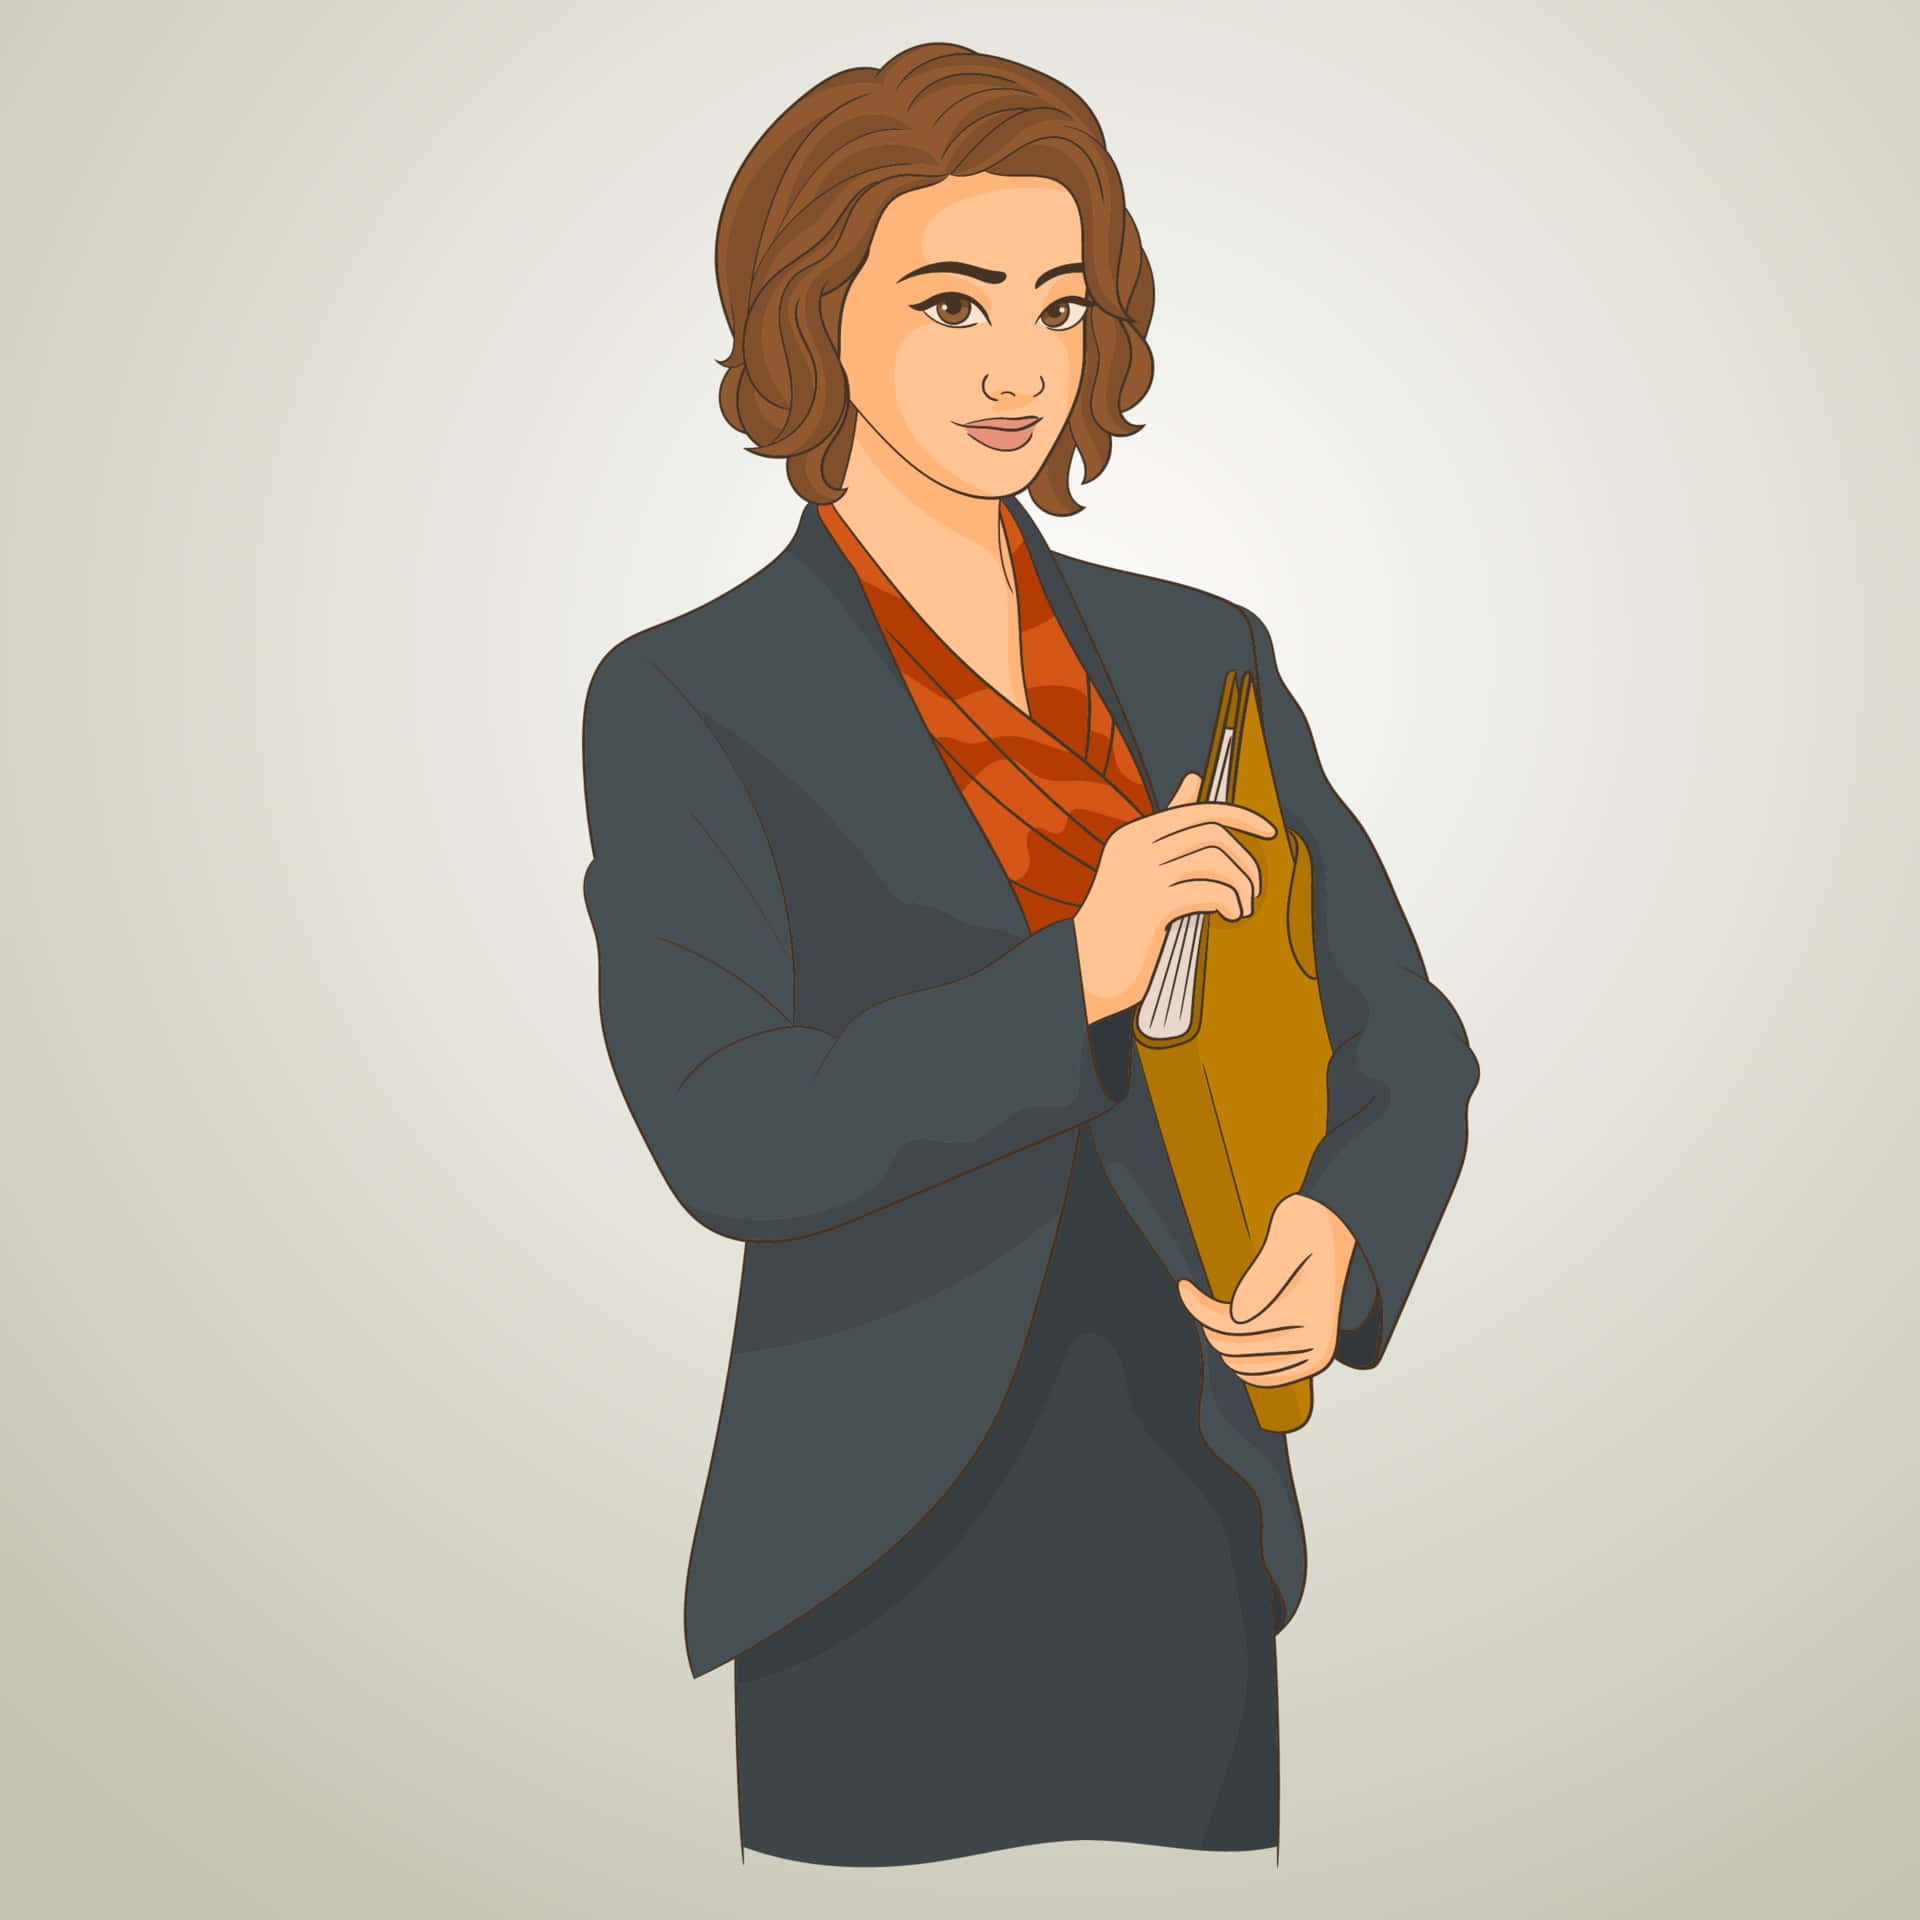 A Woman In A Suit Holding A Folder Wallpaper